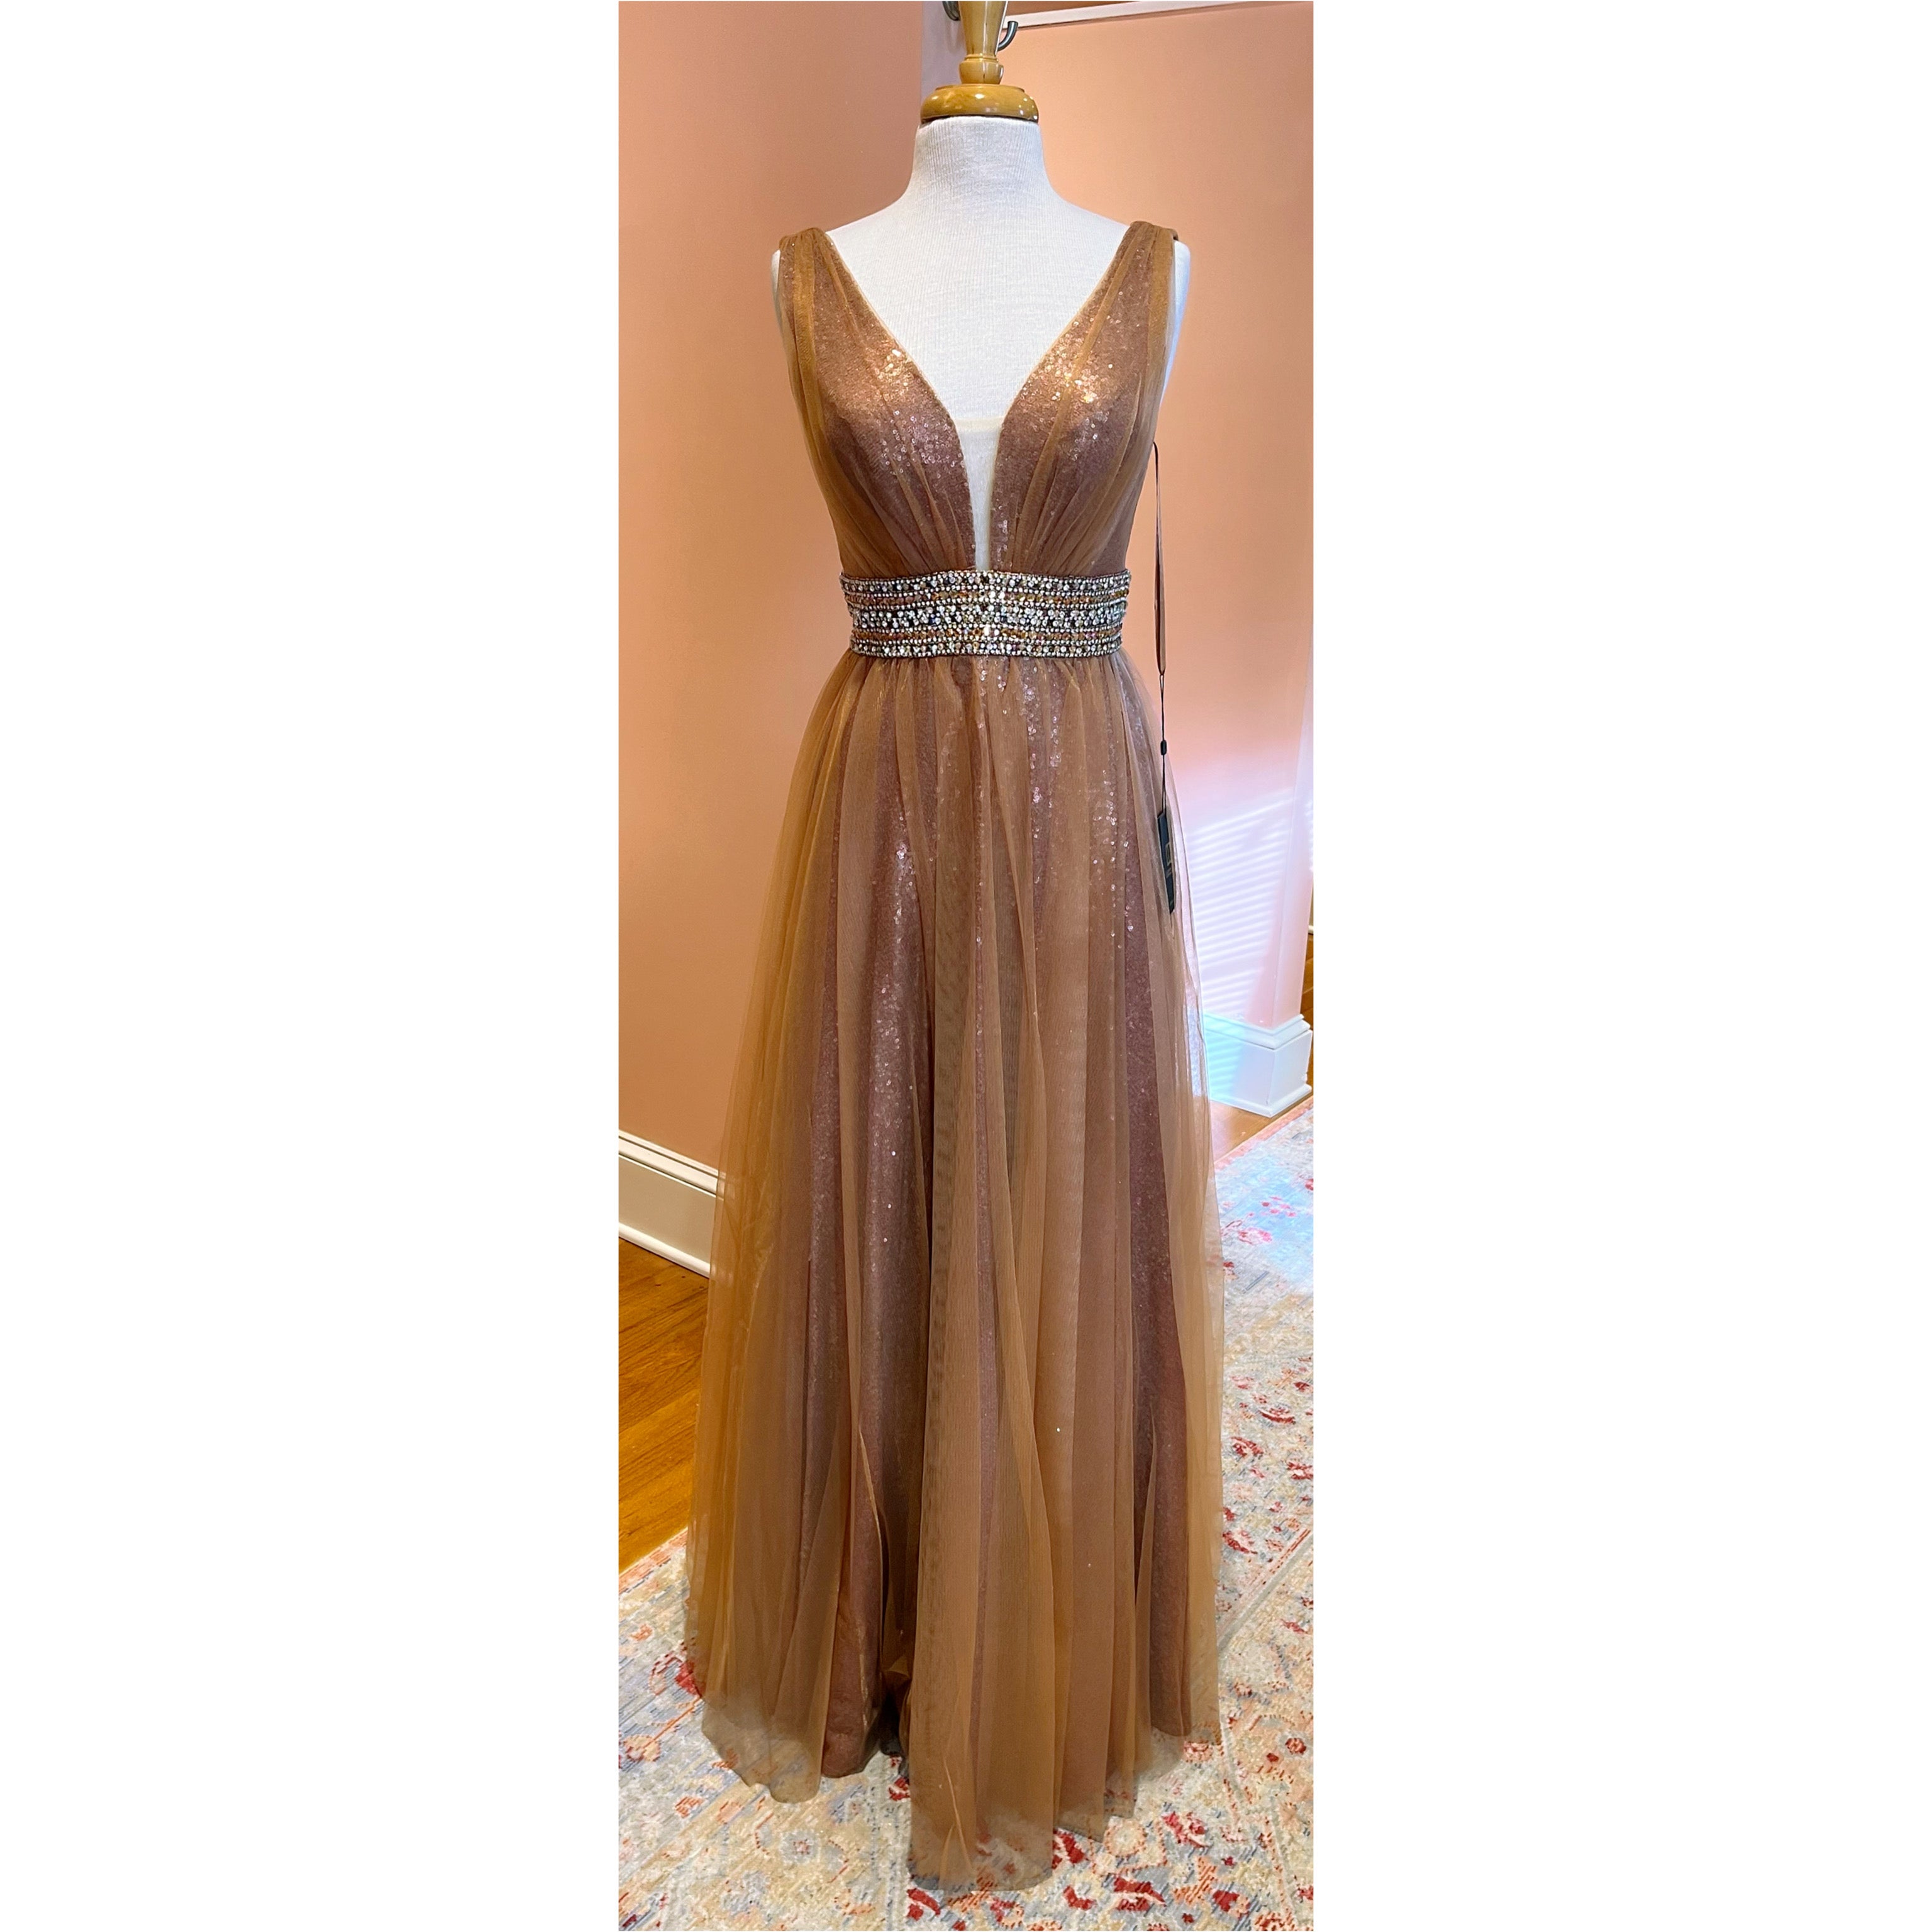 Lucci Lu bronze ballgown, sizes 4 & 6, NEW WITH TAGS!